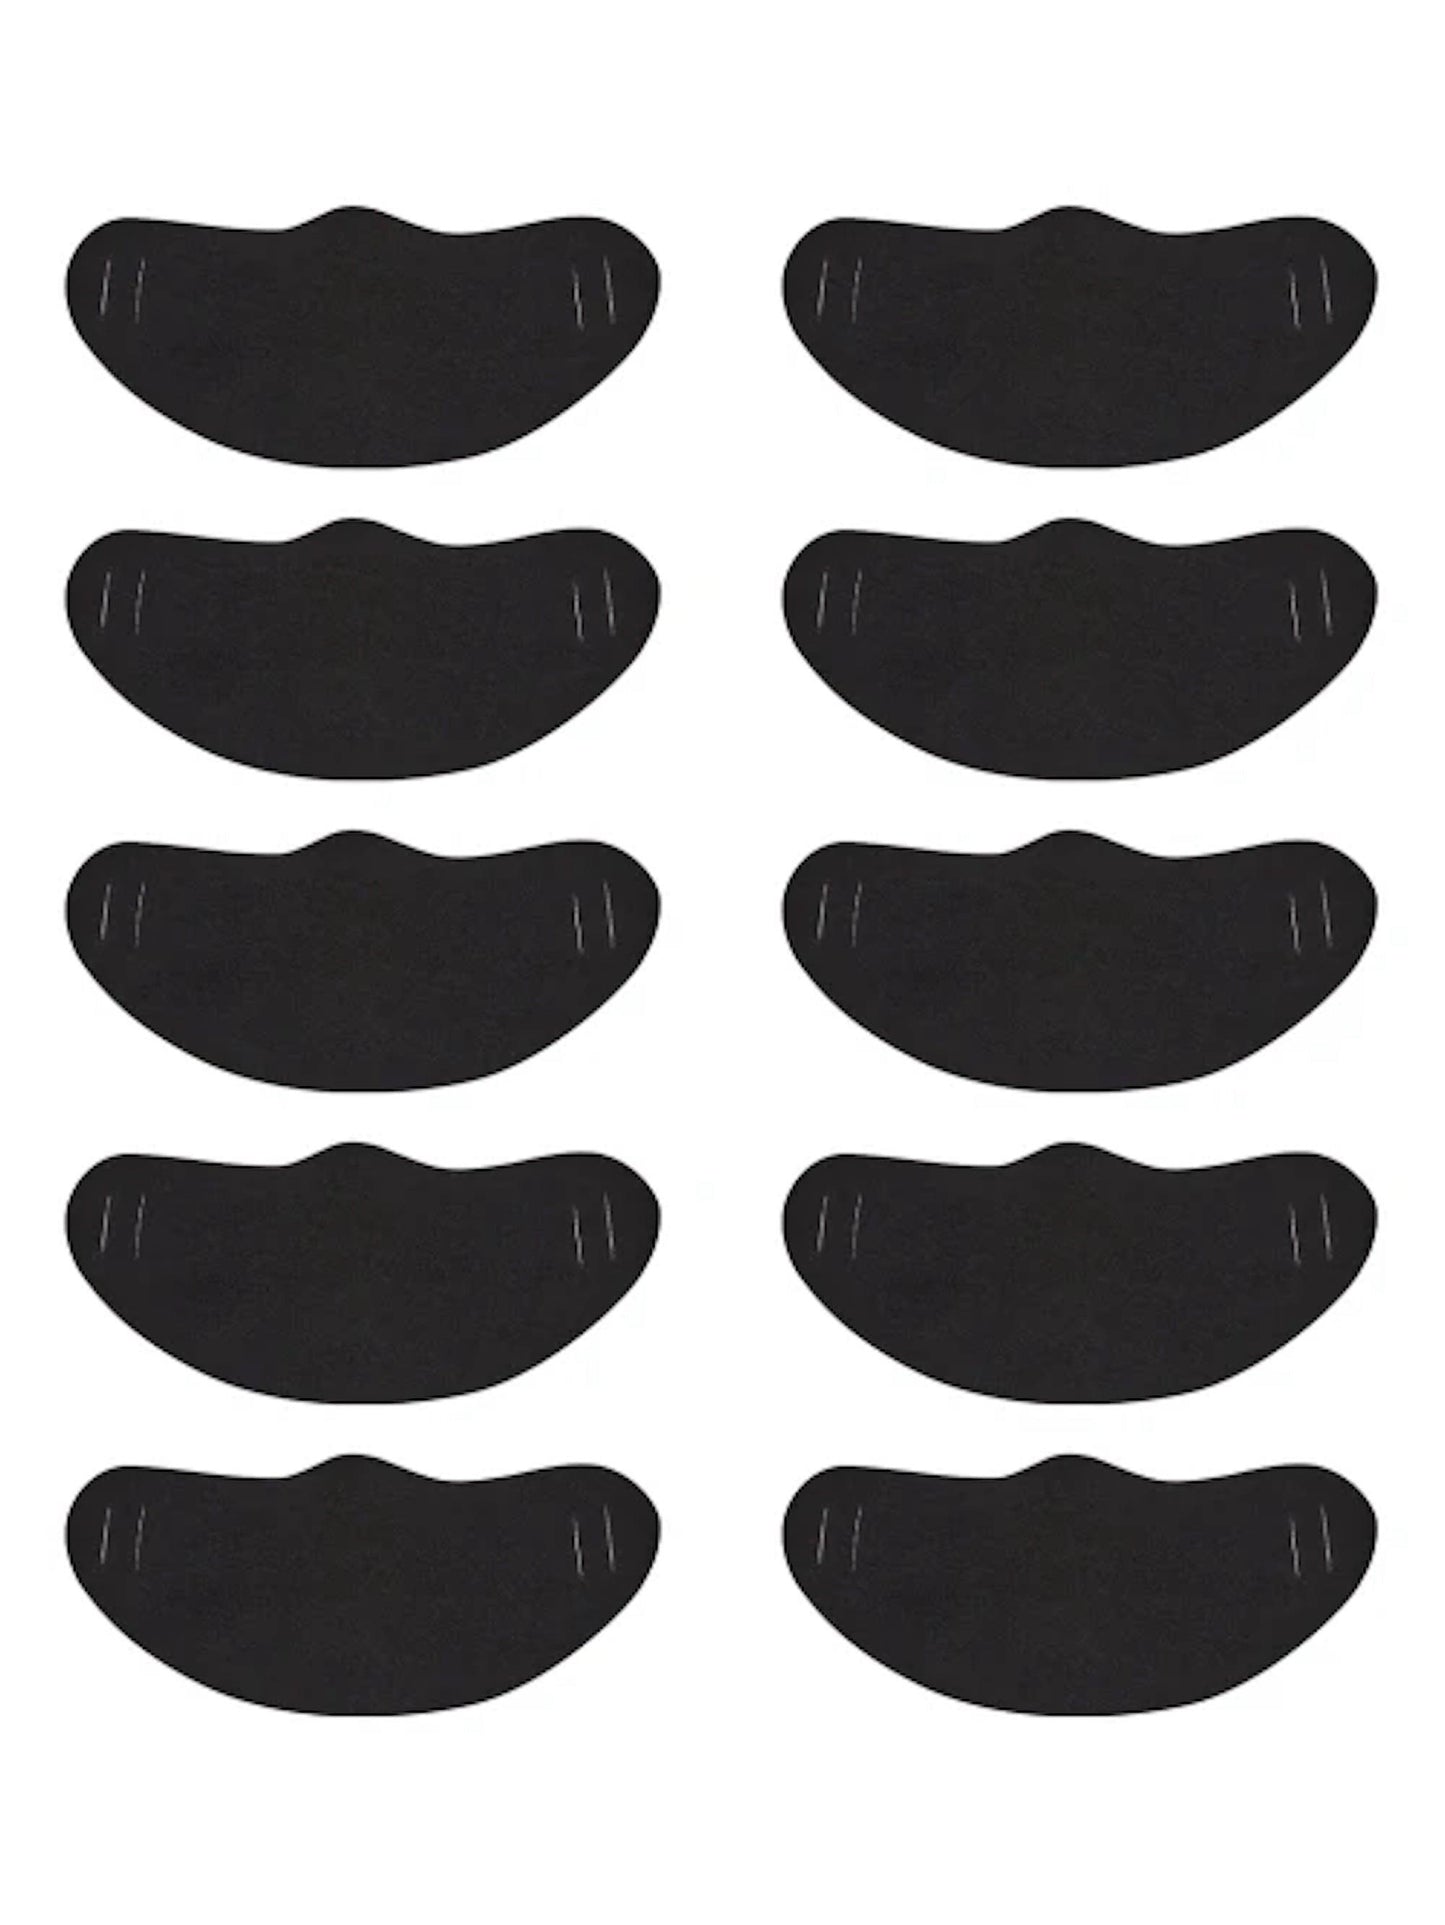 Daily Canvas Cloth Face Coverings, Black, Pack Of 10-Shalav5